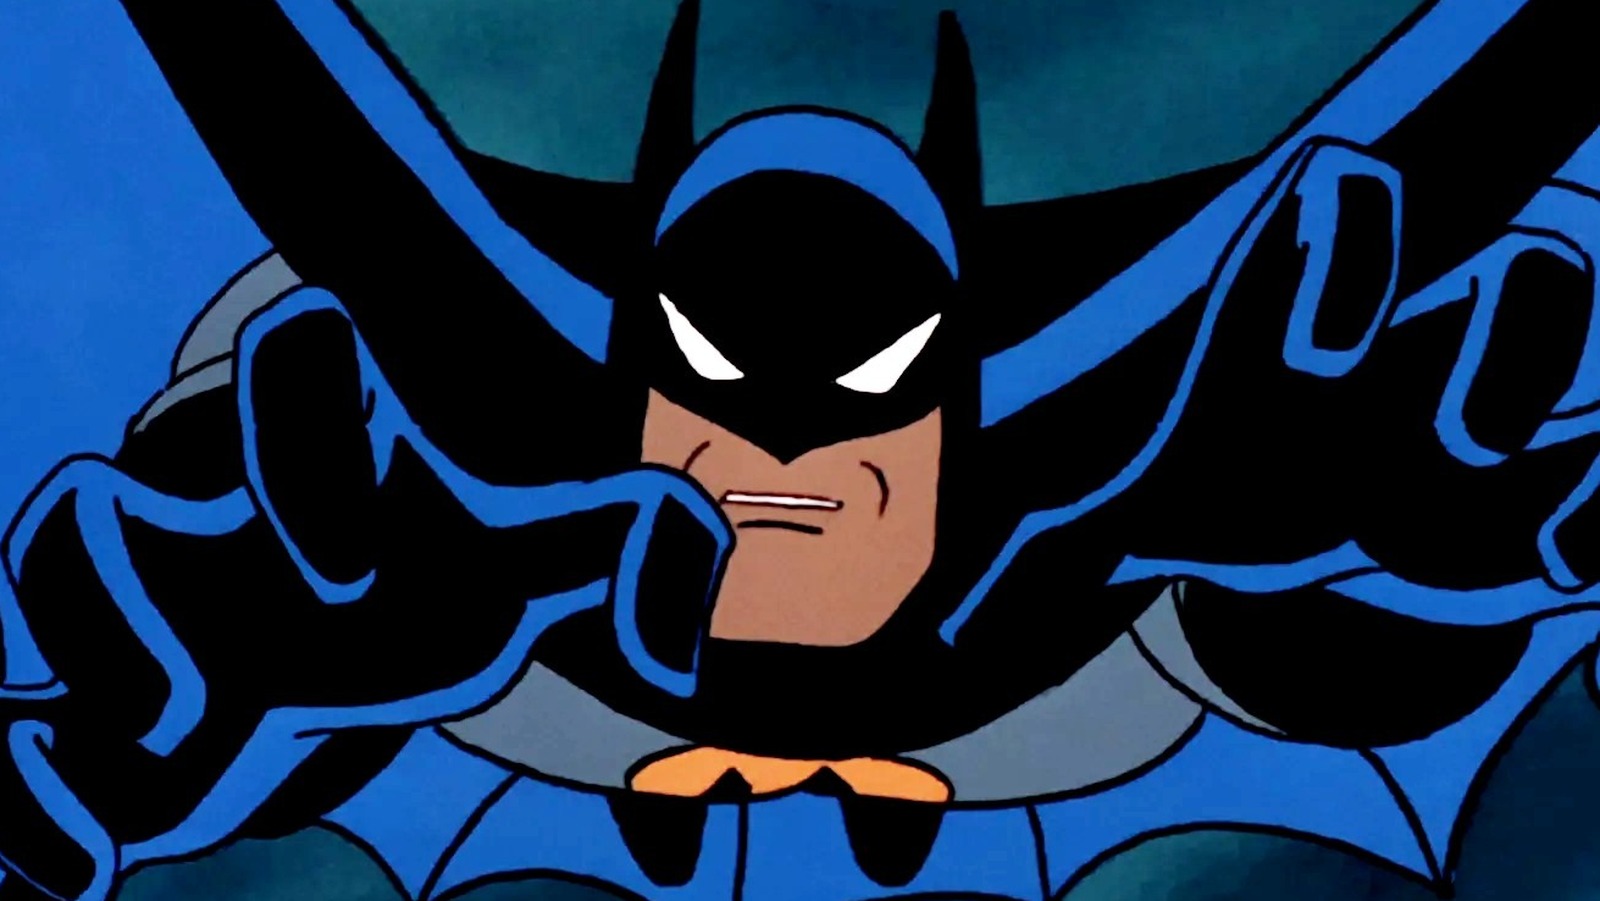 Diedrich Bader Could Be the Best Successor to Kevin Conroy's Batman